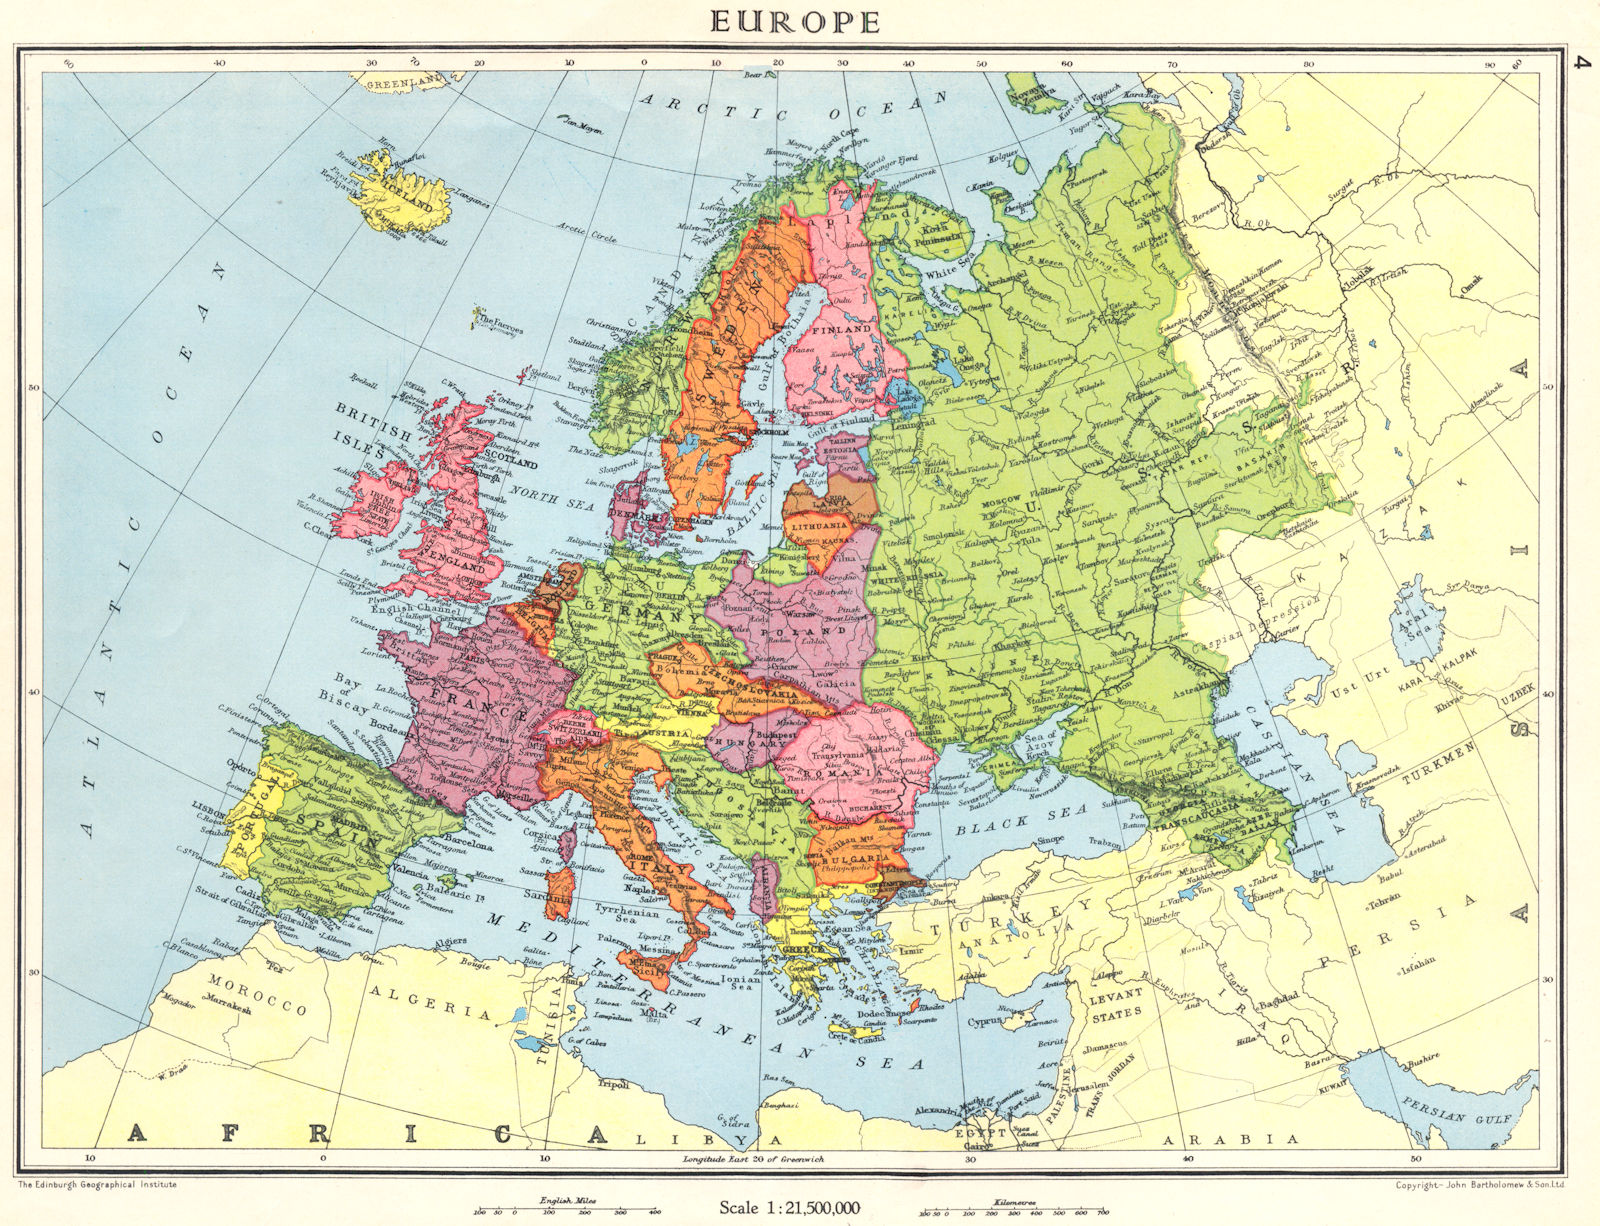 EUROPE. Europe shortly before World War 2 1938 old vintage map plan chart